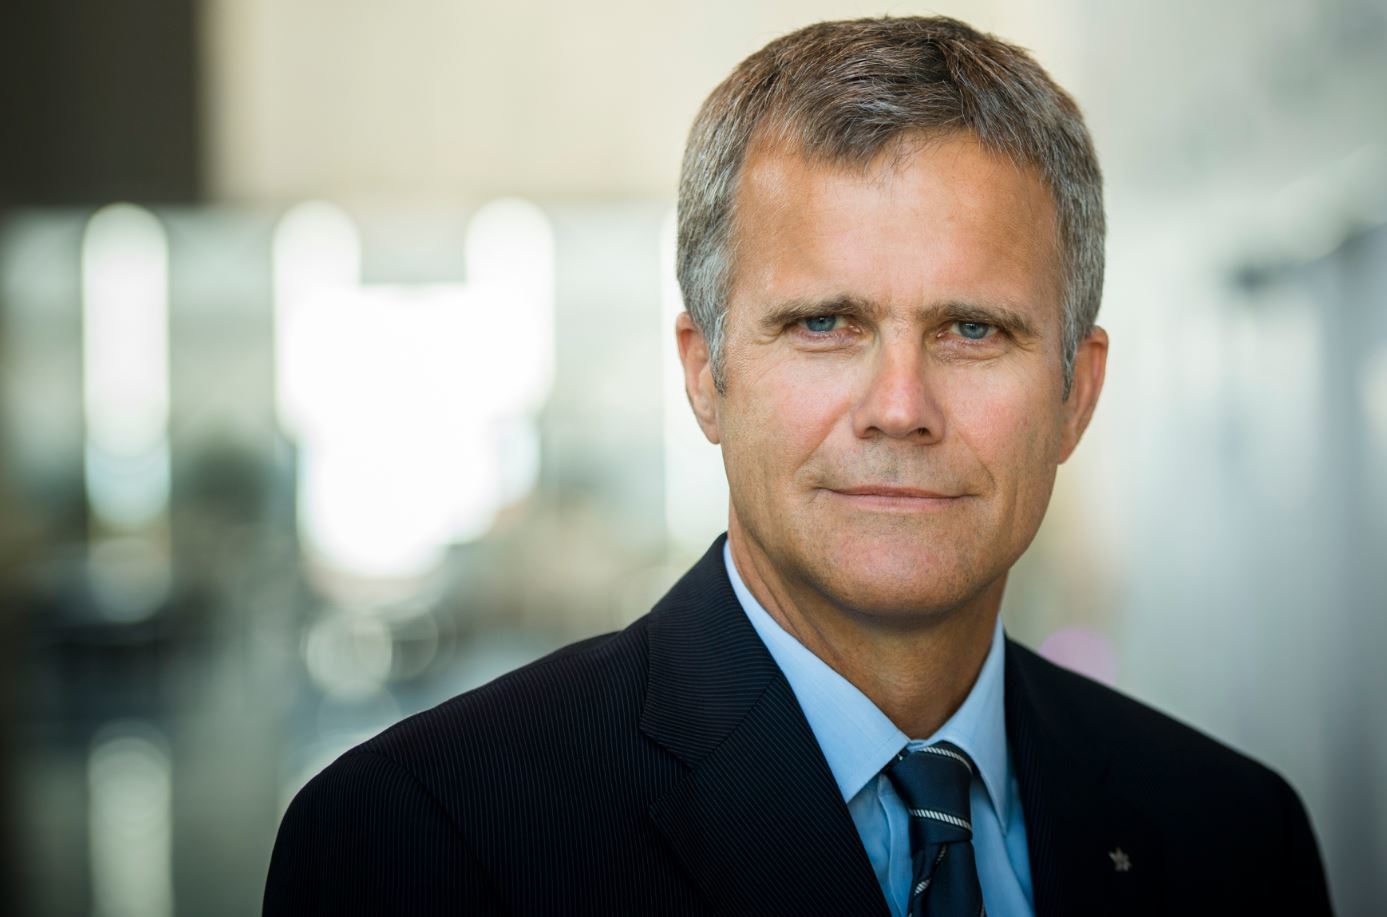 New BP on-executive director and chairman, Helge Lund